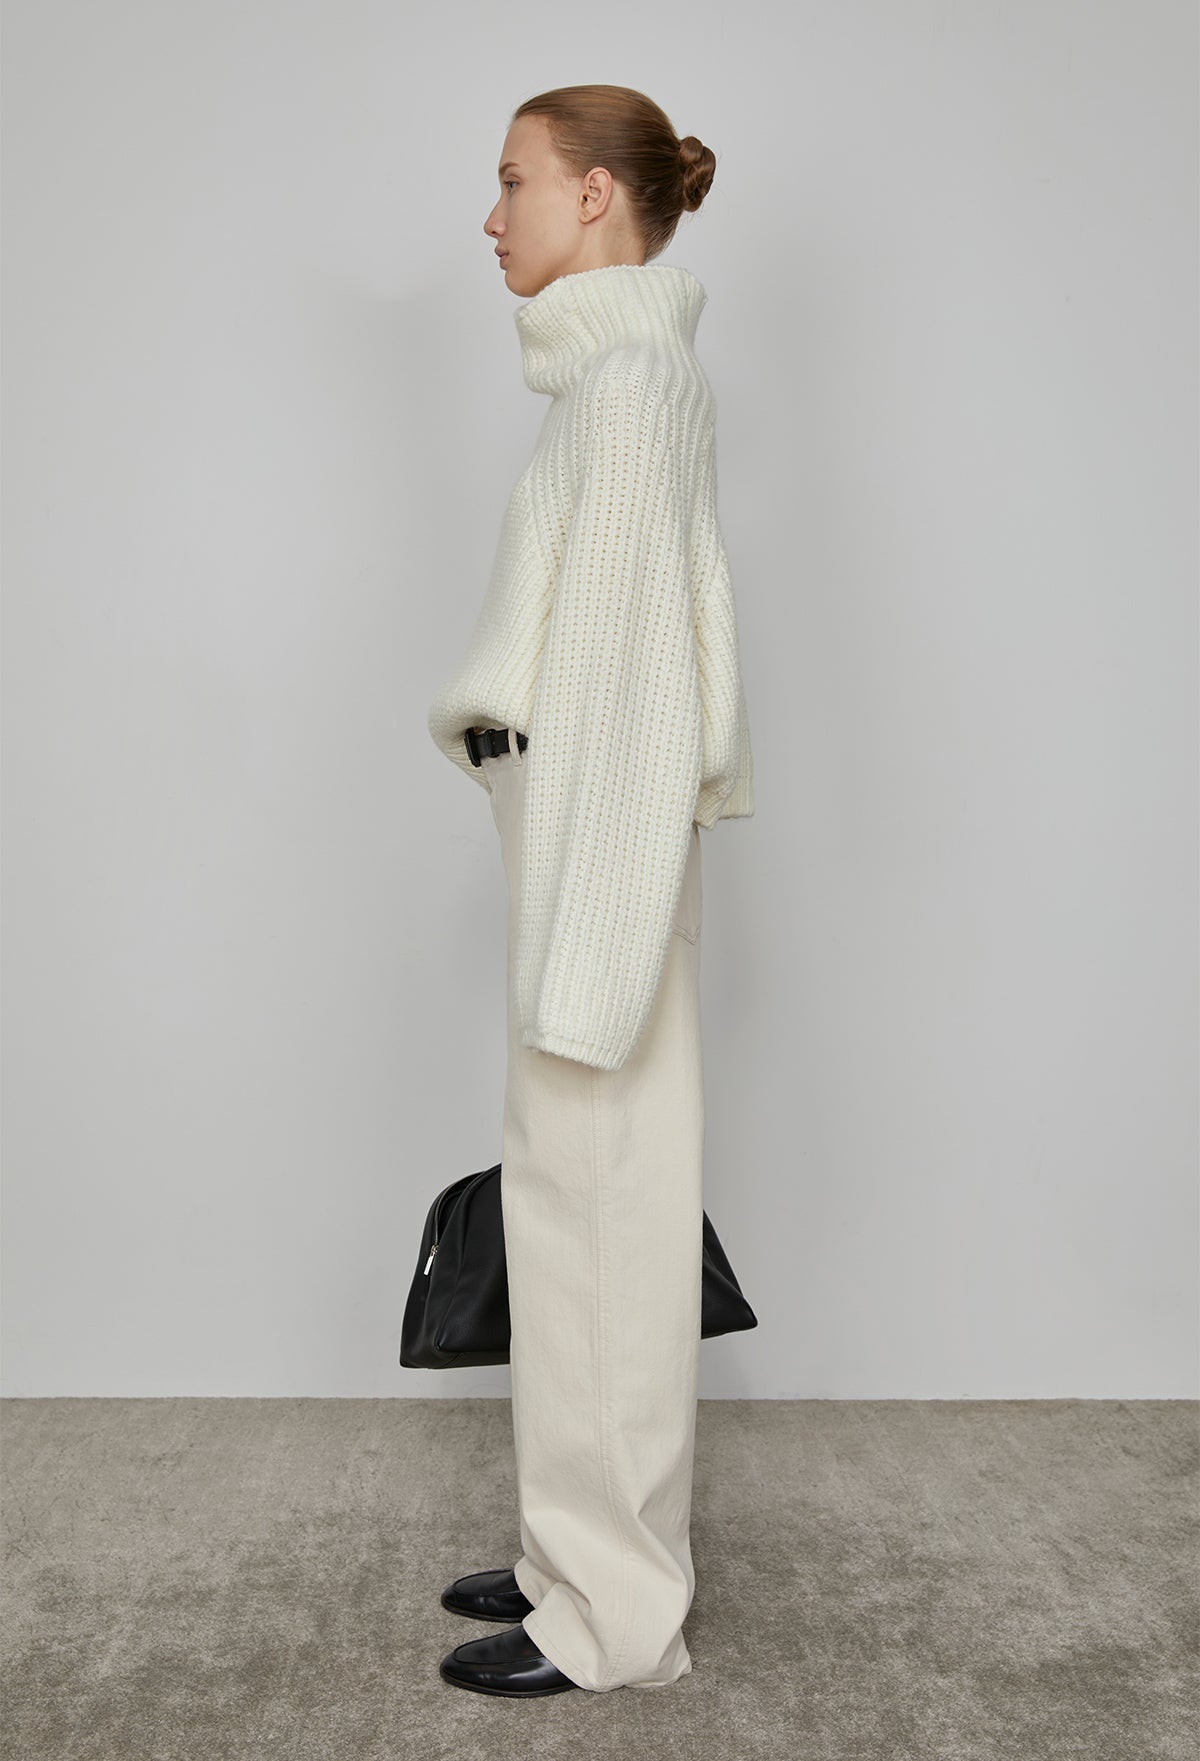 Slouchy High-neck Sweater In Ivory